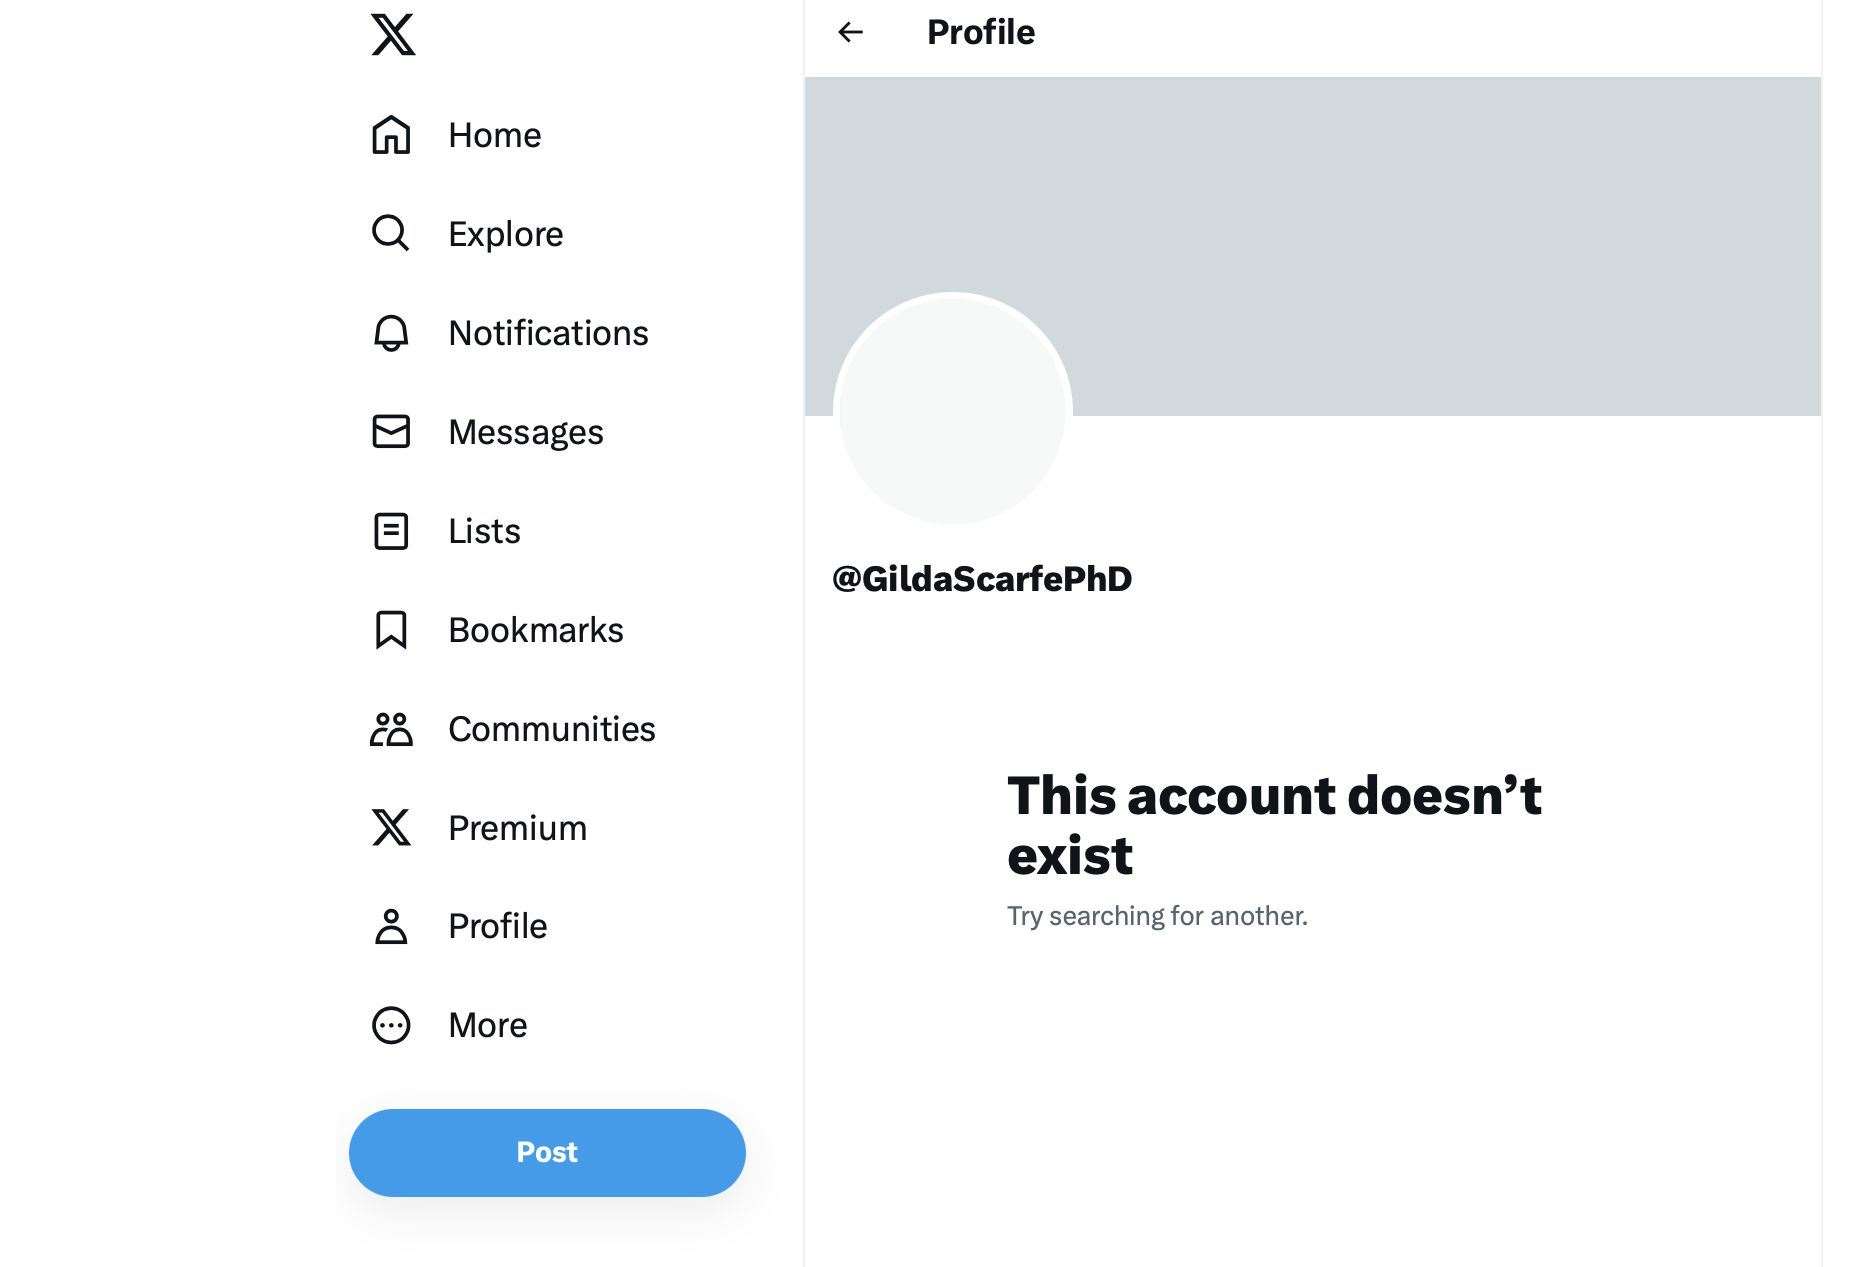 The @GildaScarfePHD account on X (formerly known as Twitter) was deleted earlier this week